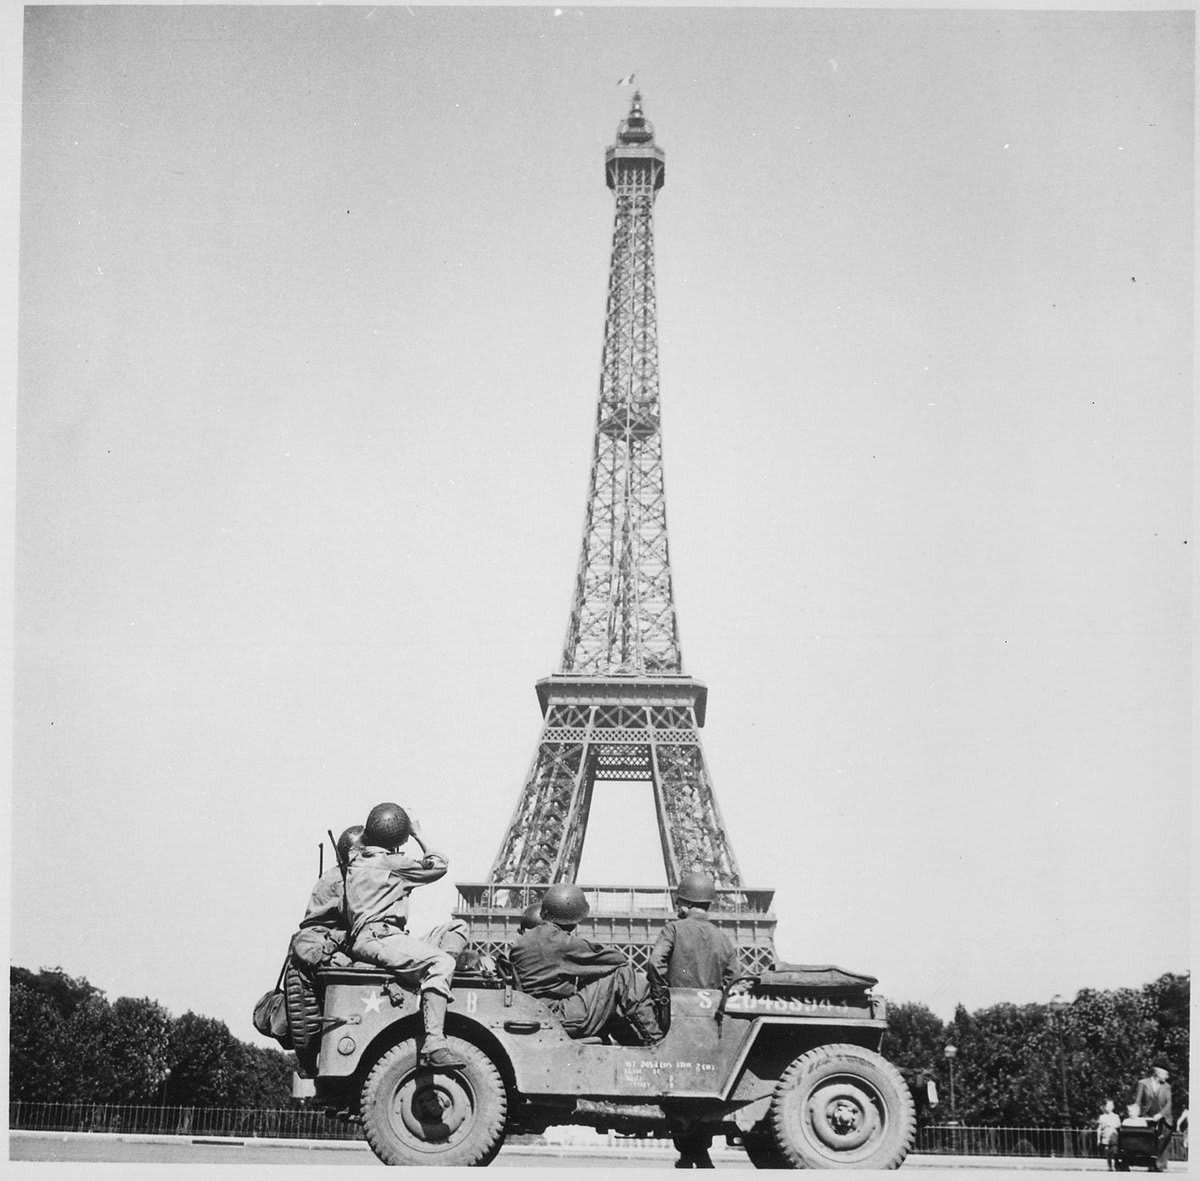 "Soldiers of the 4th U.S. Infantry Division look at the Eiffel Tower in Paris, after the French capital had been liberated on August 25, 1944." 75 years ago